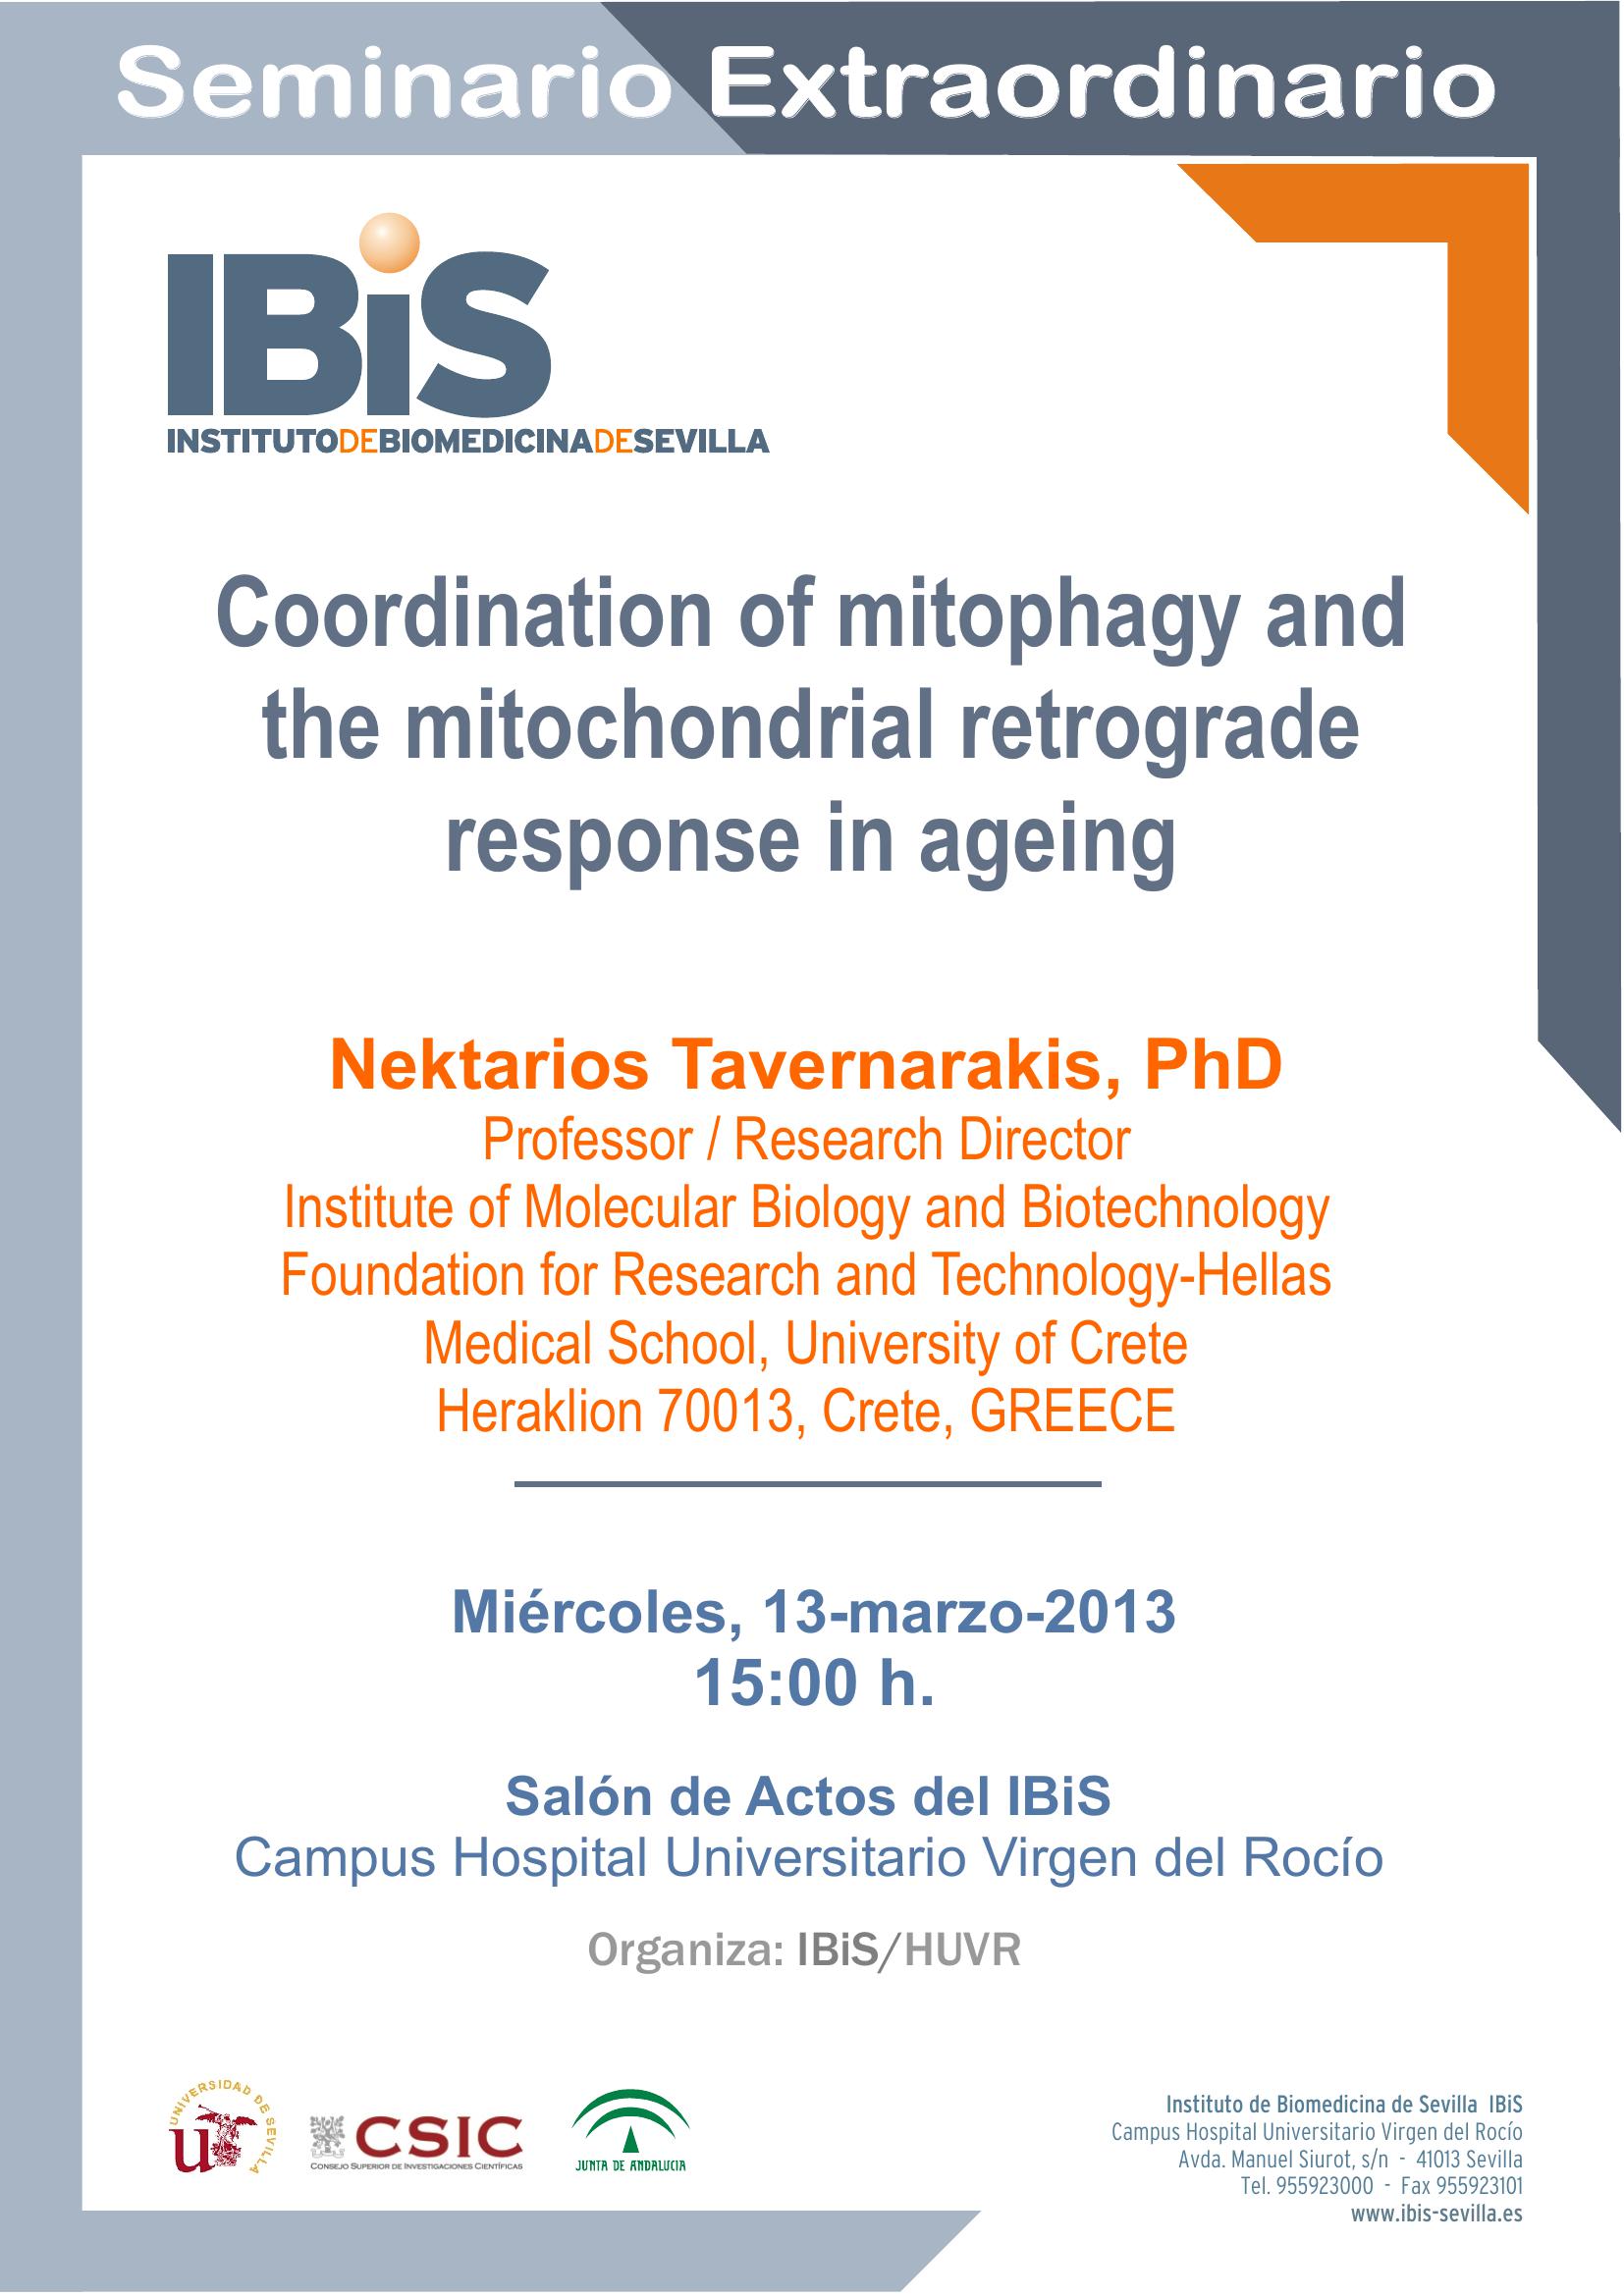 Poster: Coordination of mitophagy and the mitochondrial retrograde response in ageing.